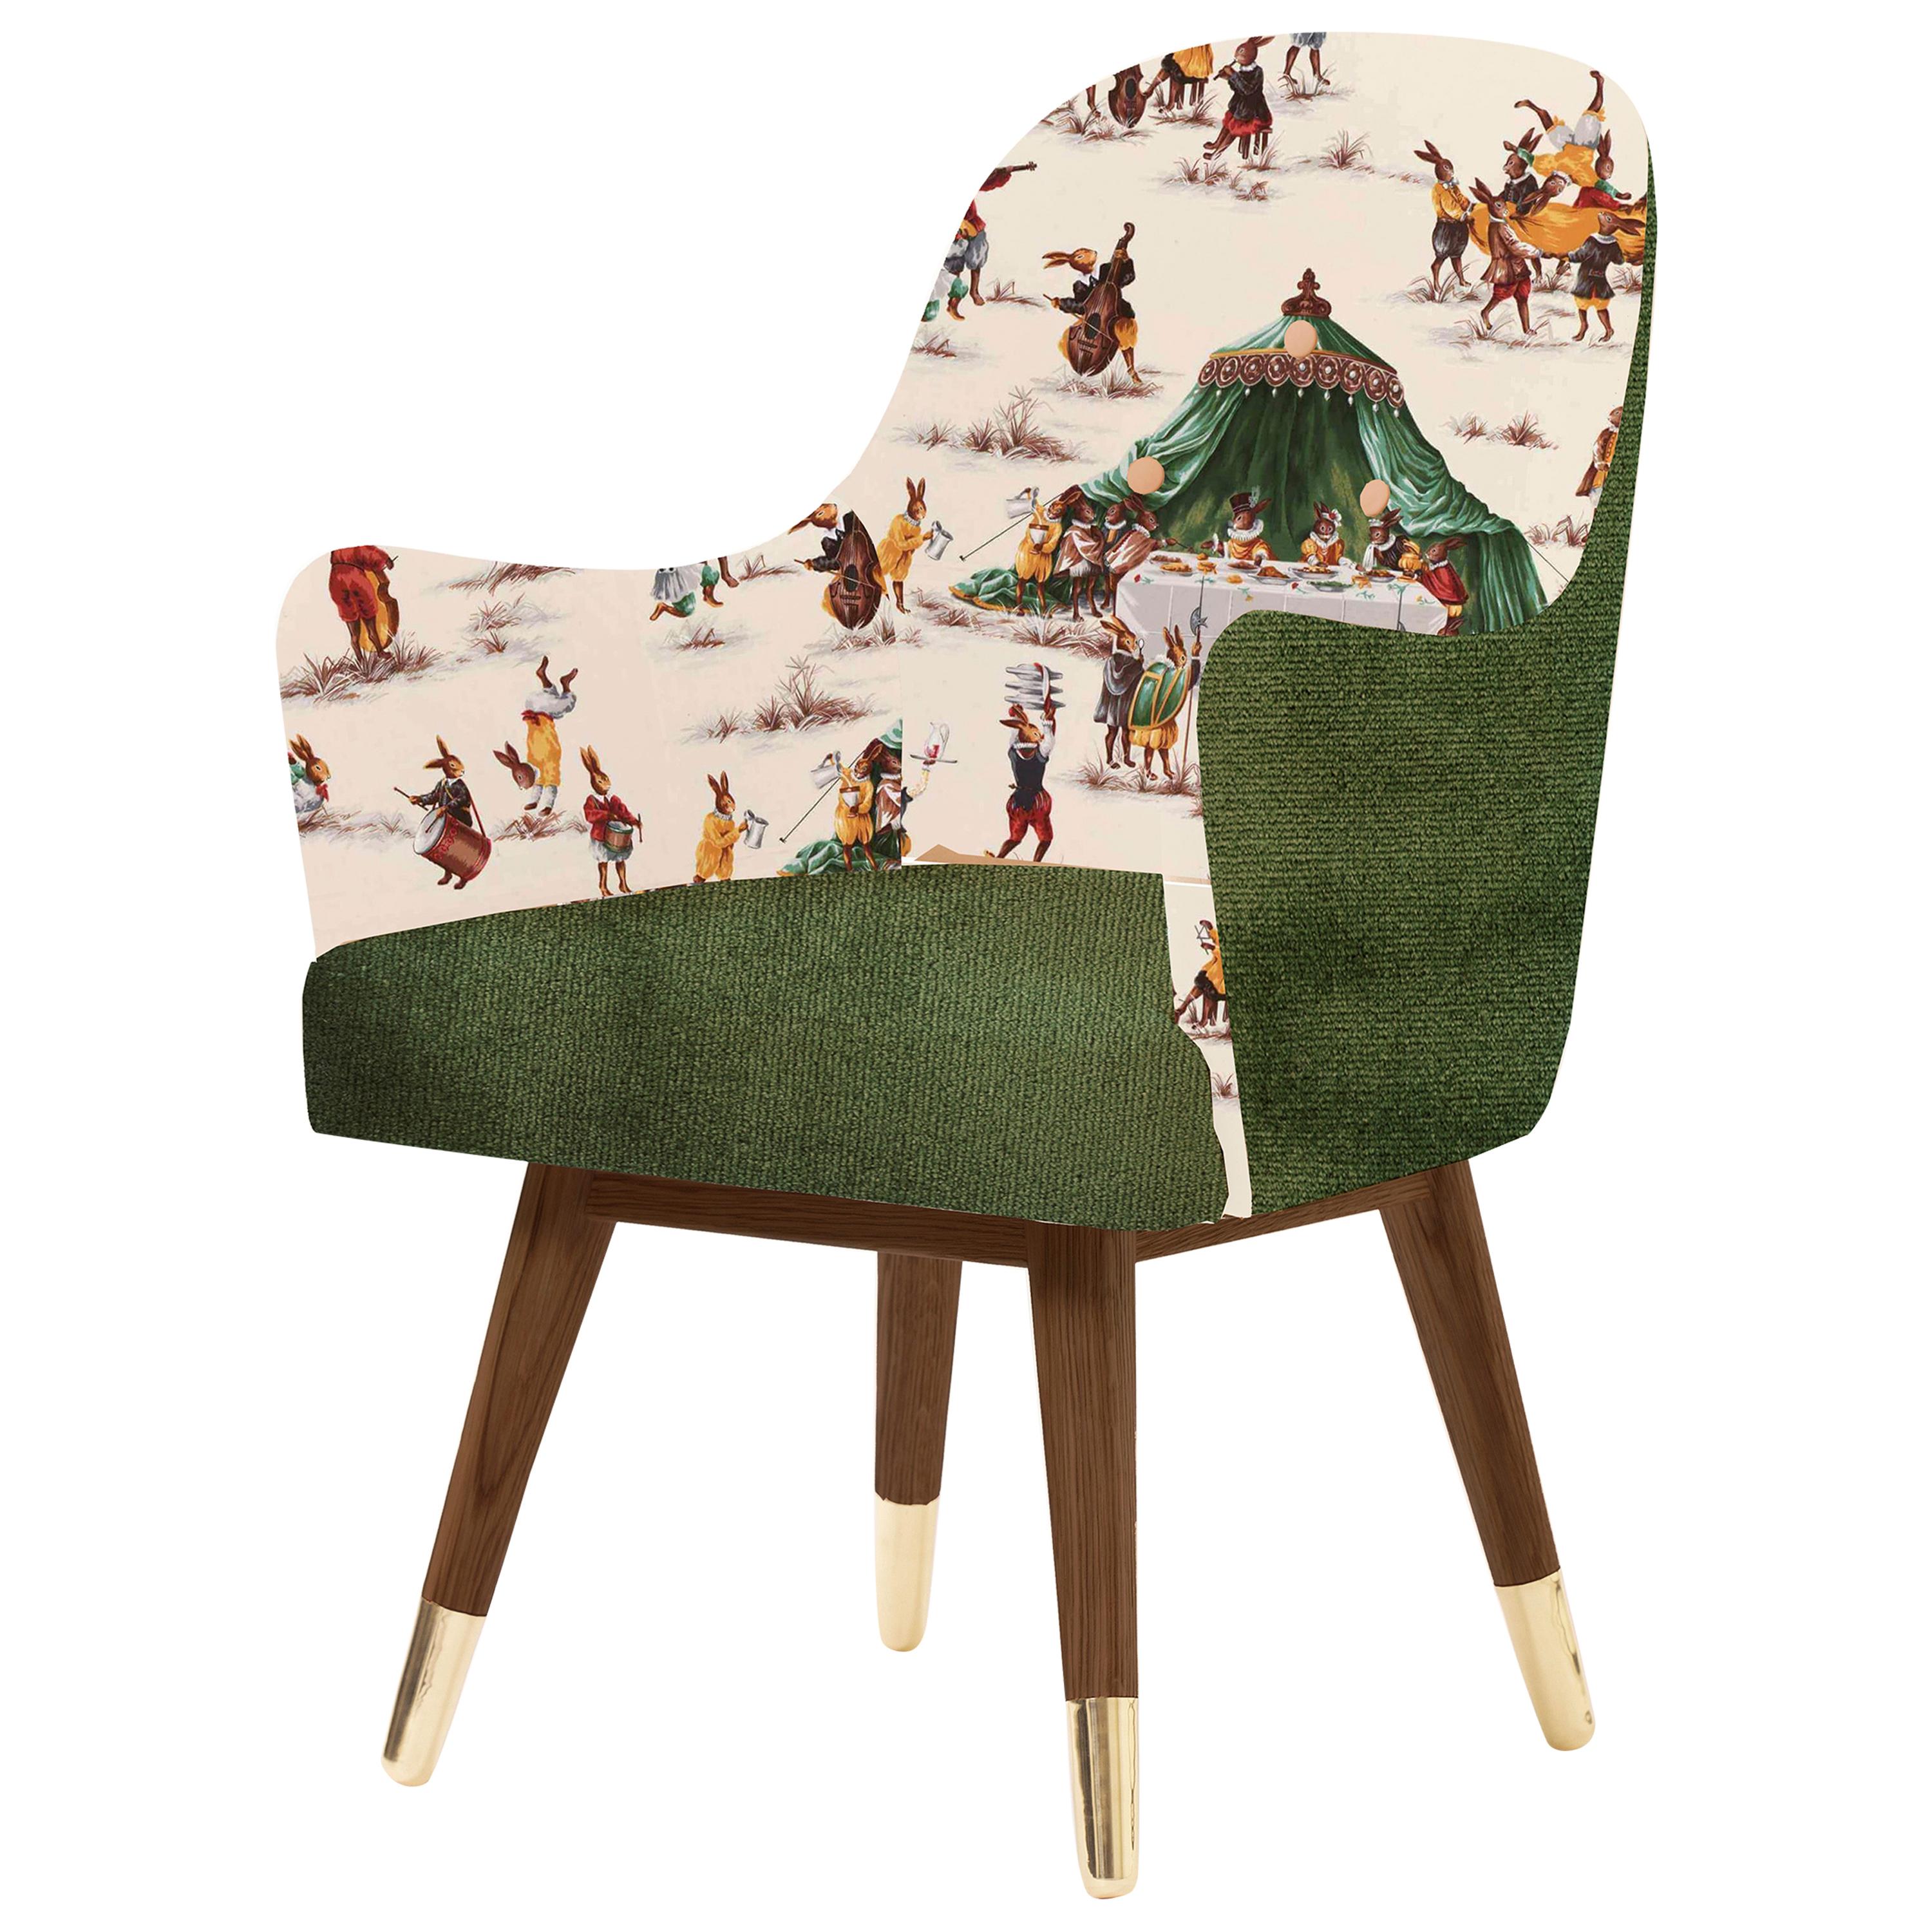 Contemporary Dandy Chair with Green Velvet, Walnut and Brass